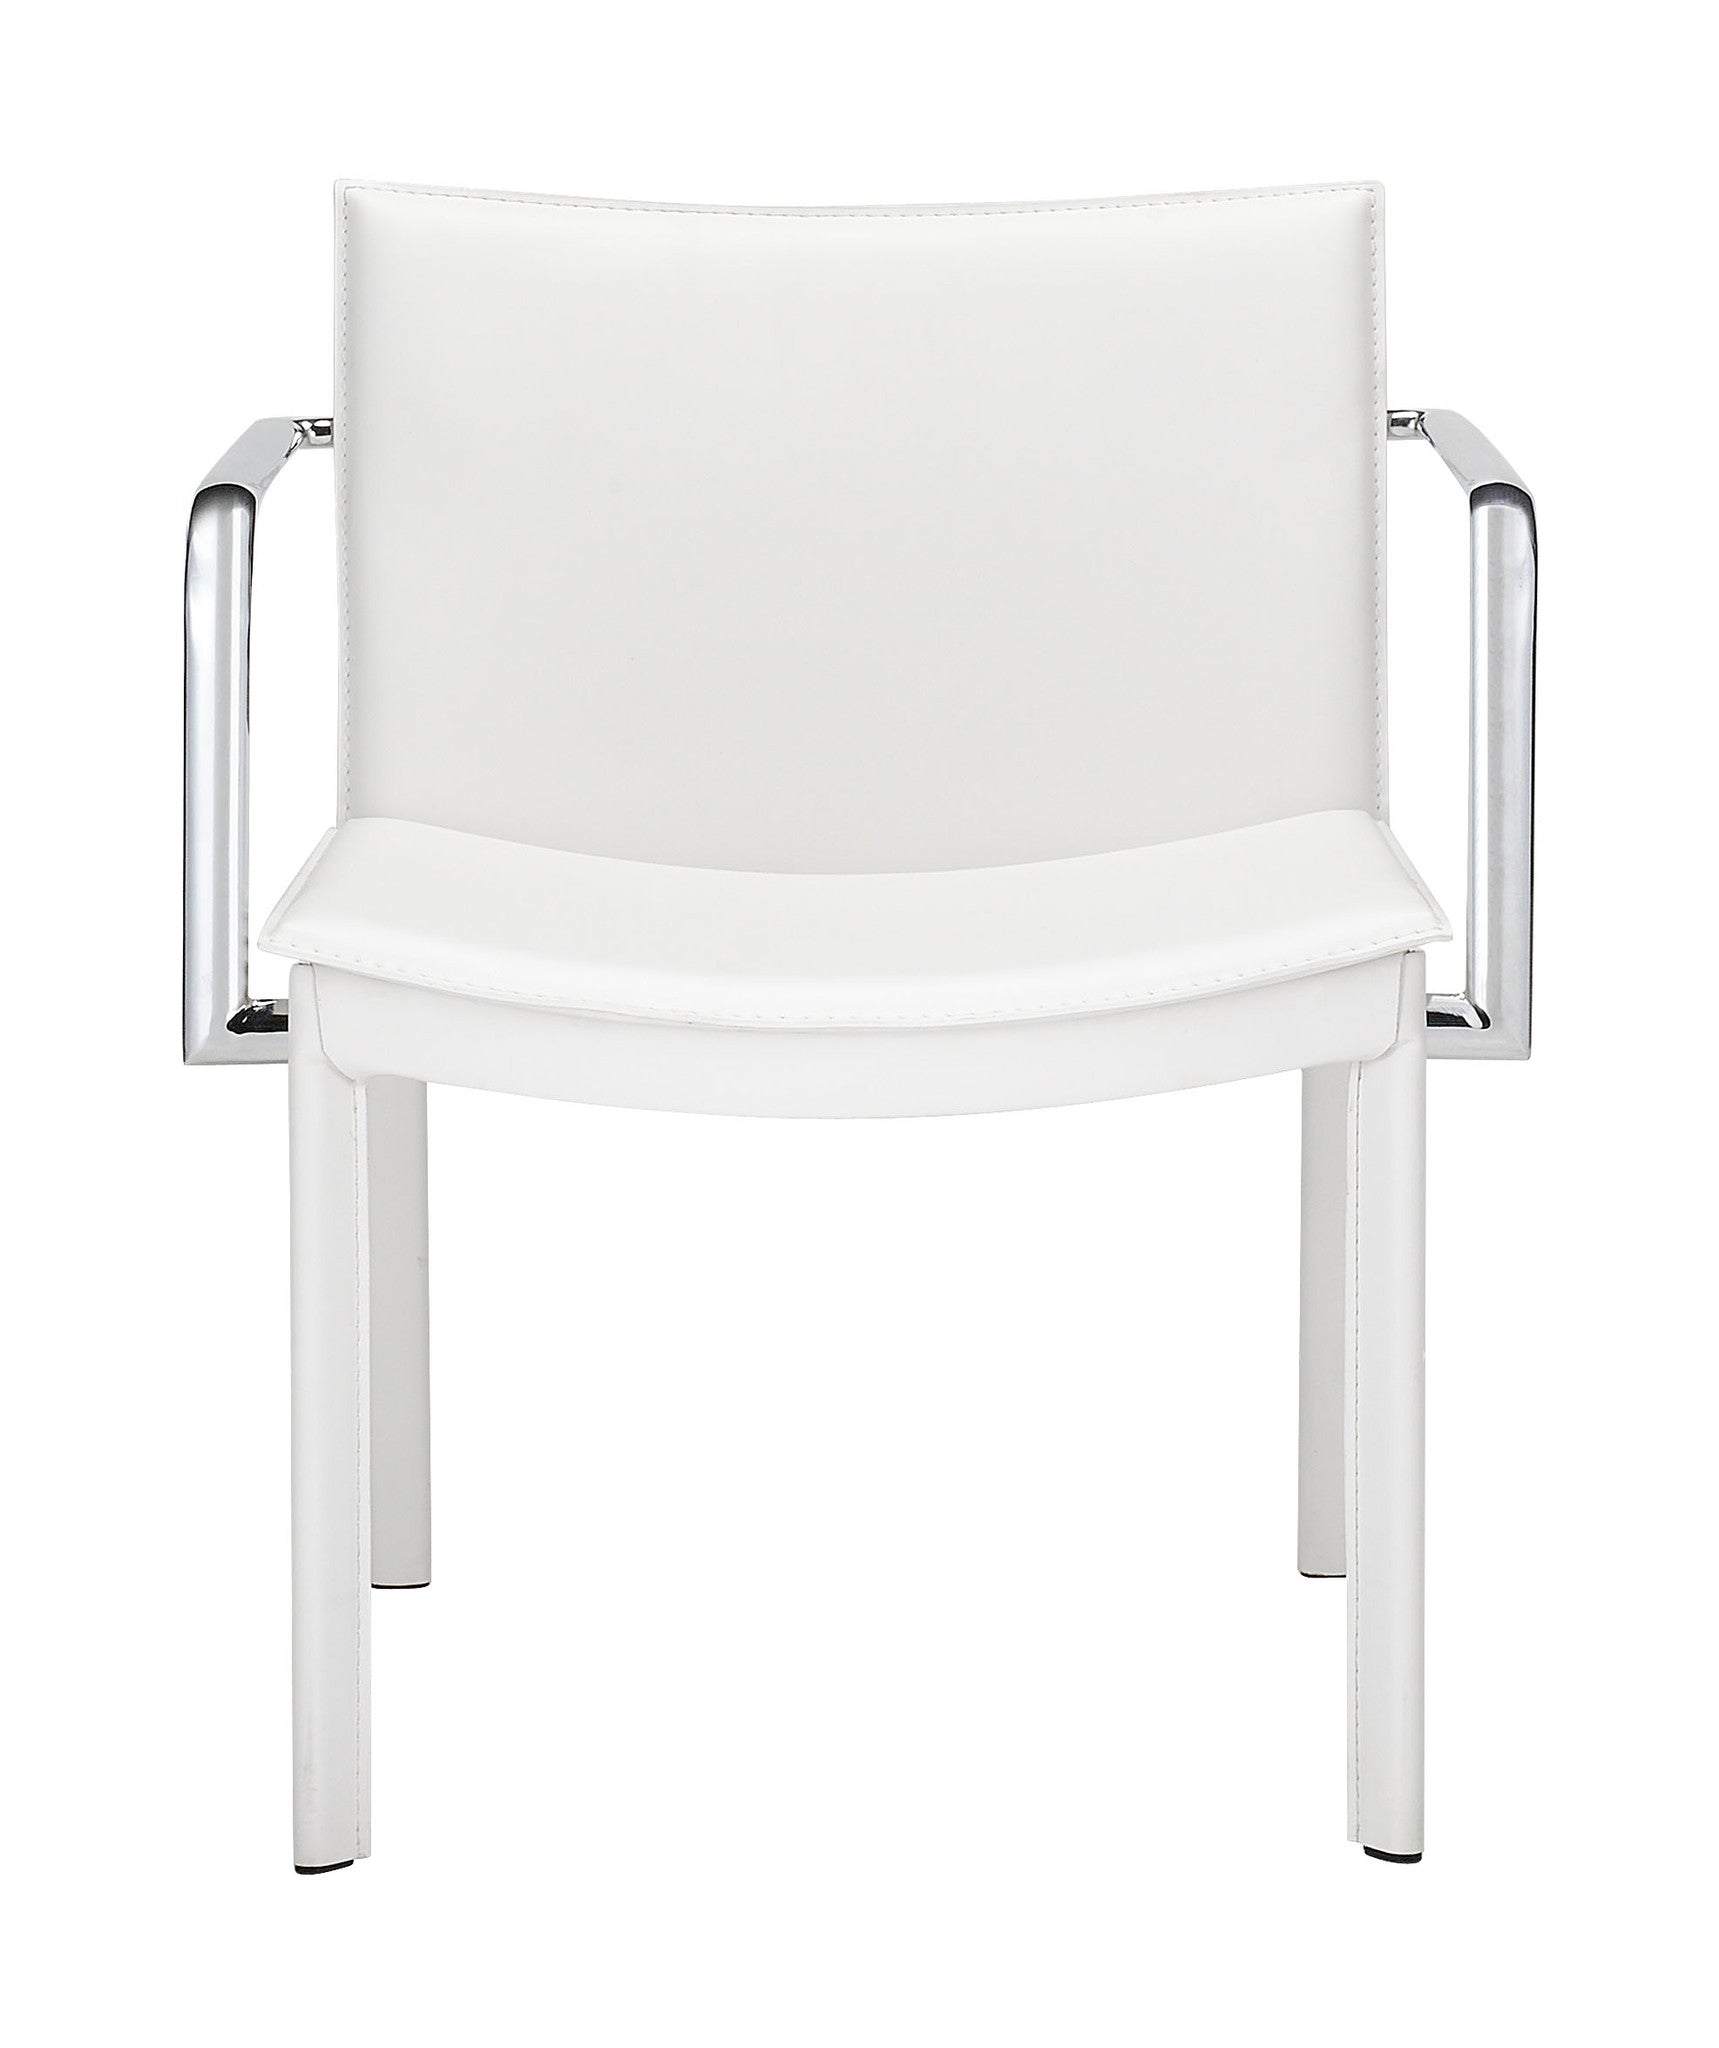 Gallant Conference Chair White (Set of 2) 